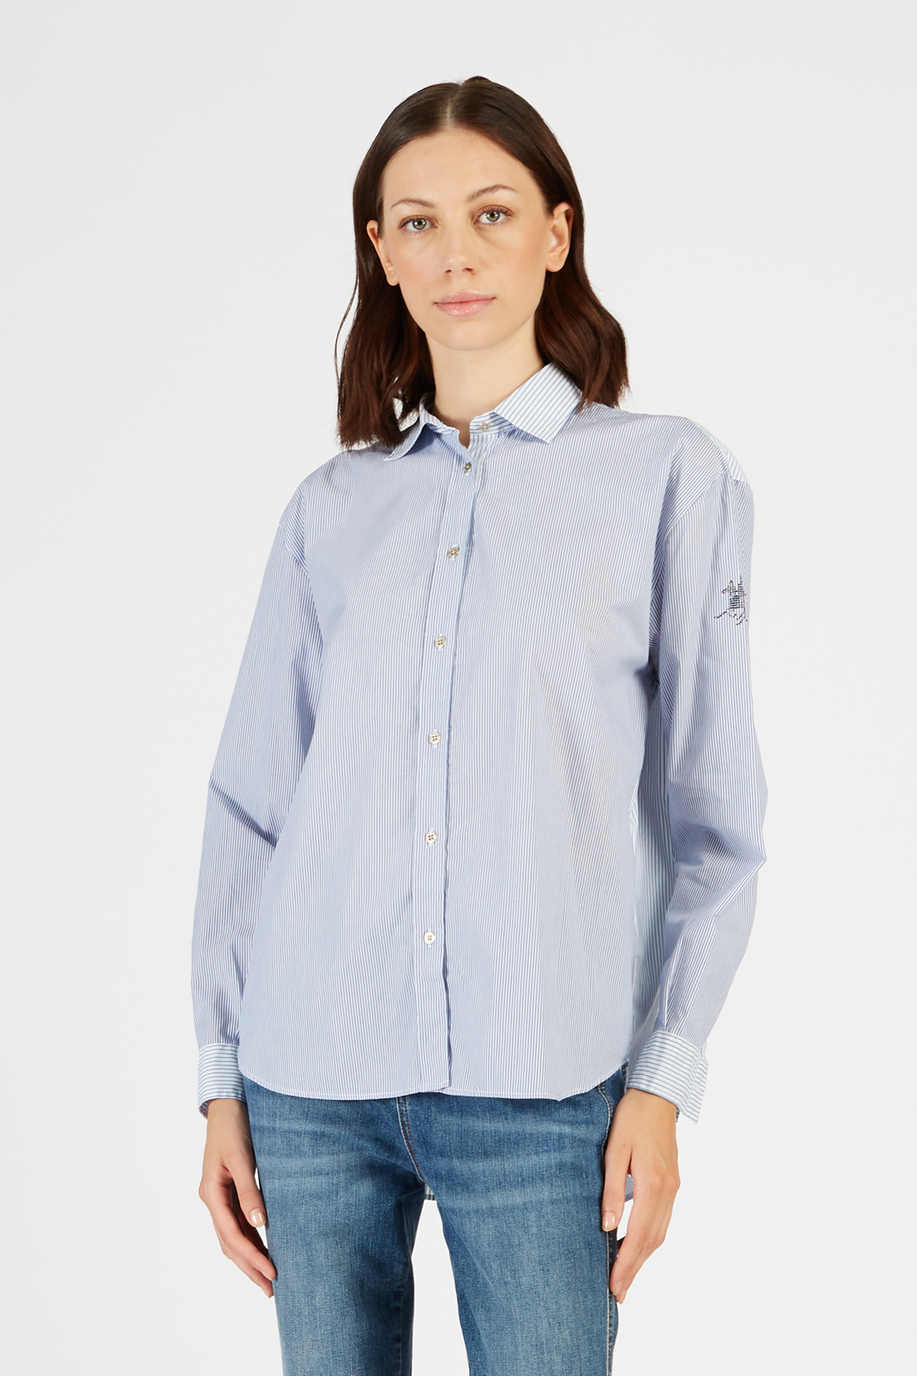 Women’s Timeless Striped Cotton Shirt Long Sleeves Regular fit - Monogrammed gifts for her | La Martina - Official Online Shop